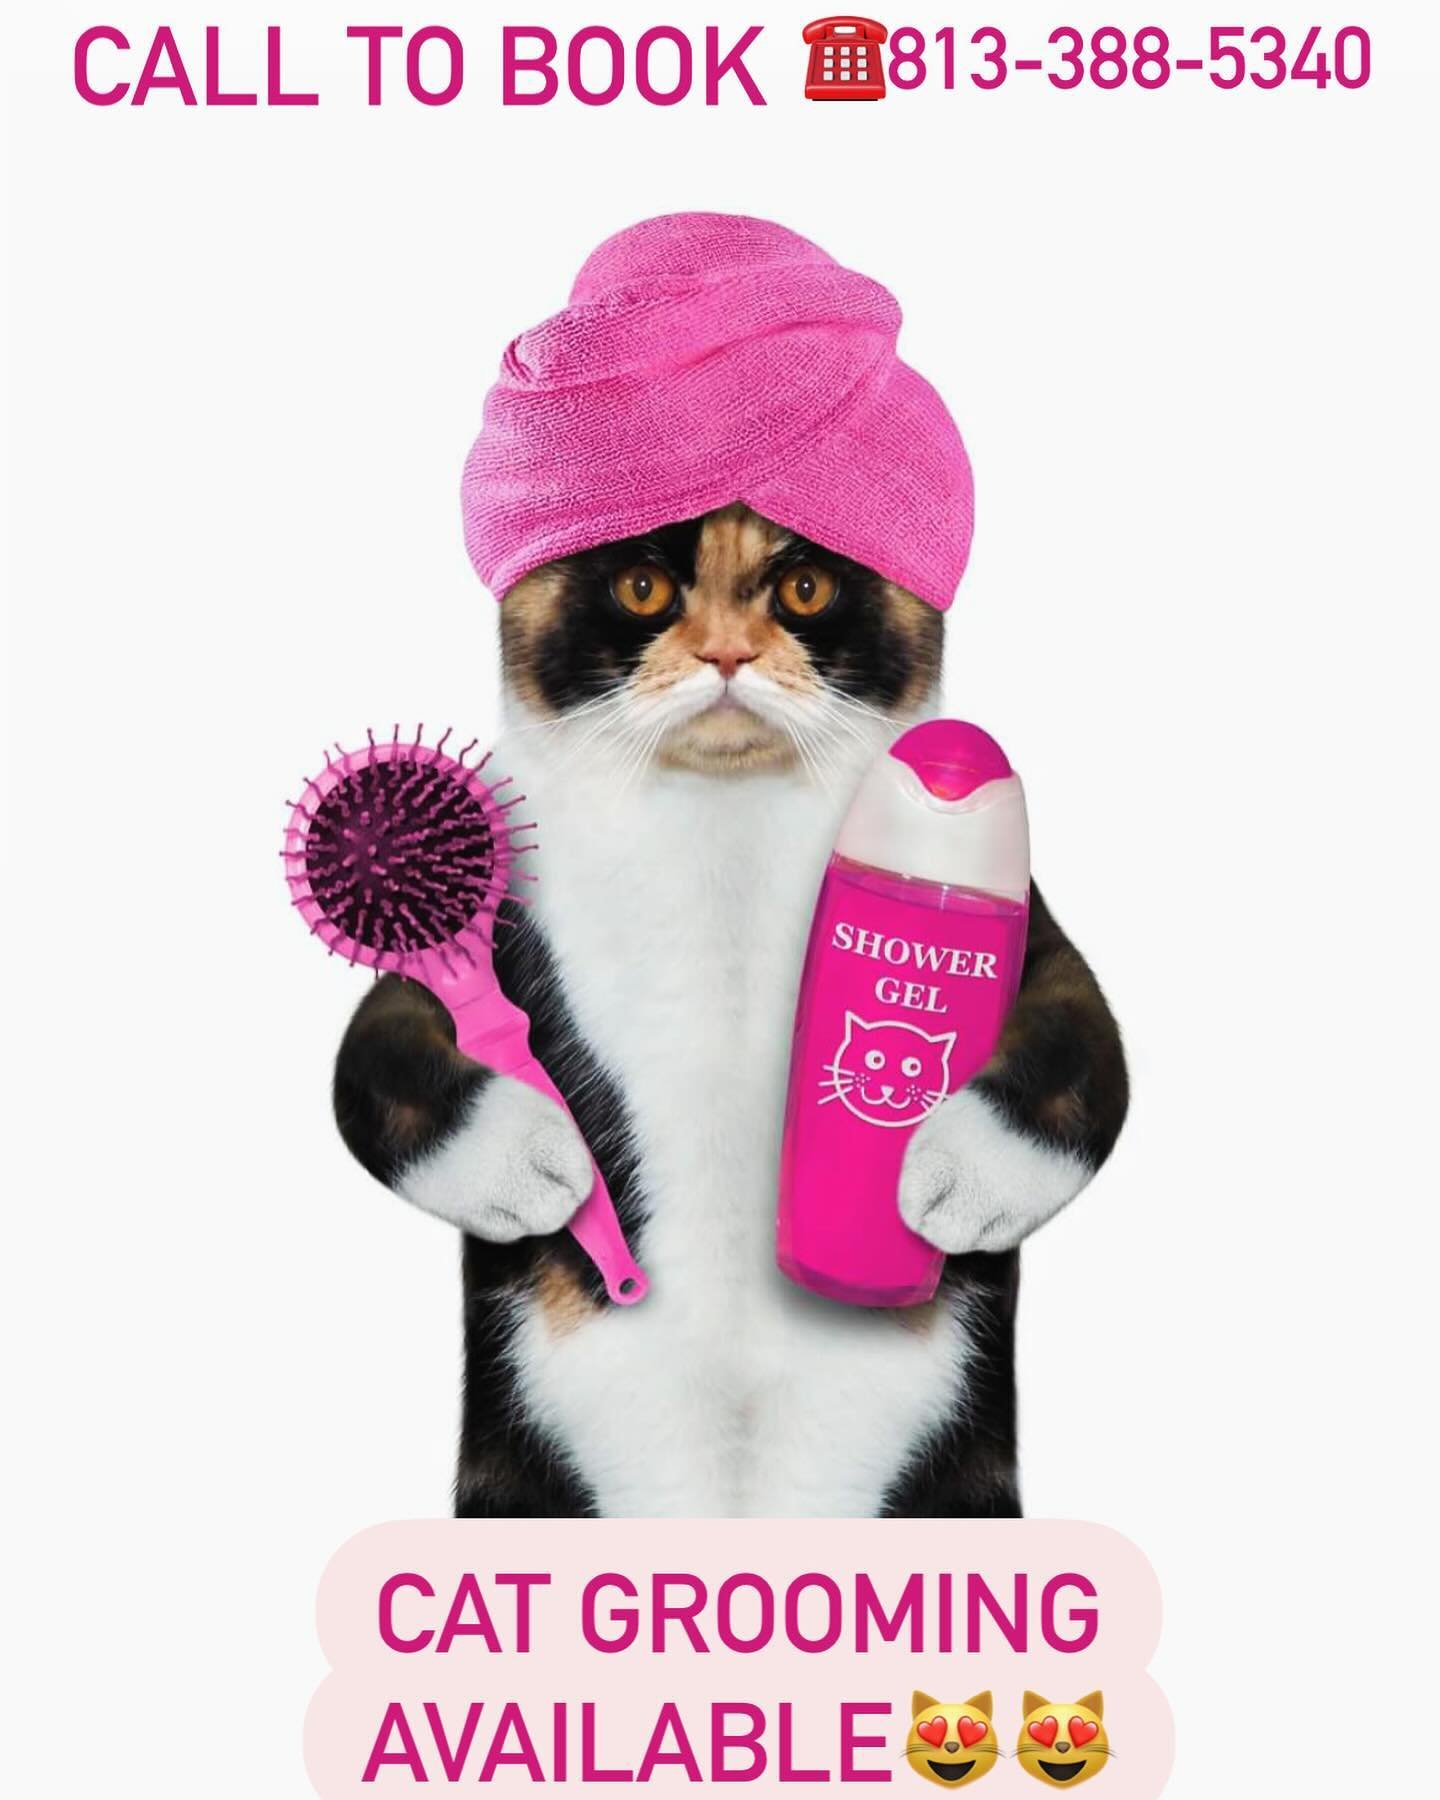 Cat Grooming available😻😻😻‼️‼️ call to book your appointment ☎️813-388-5340 #bonezandpawz #catgrooming #cat #catlover #newtampa #supportsmallbusiness #grooming #petgrooming #pet #petlovers #doggrooming #grooming